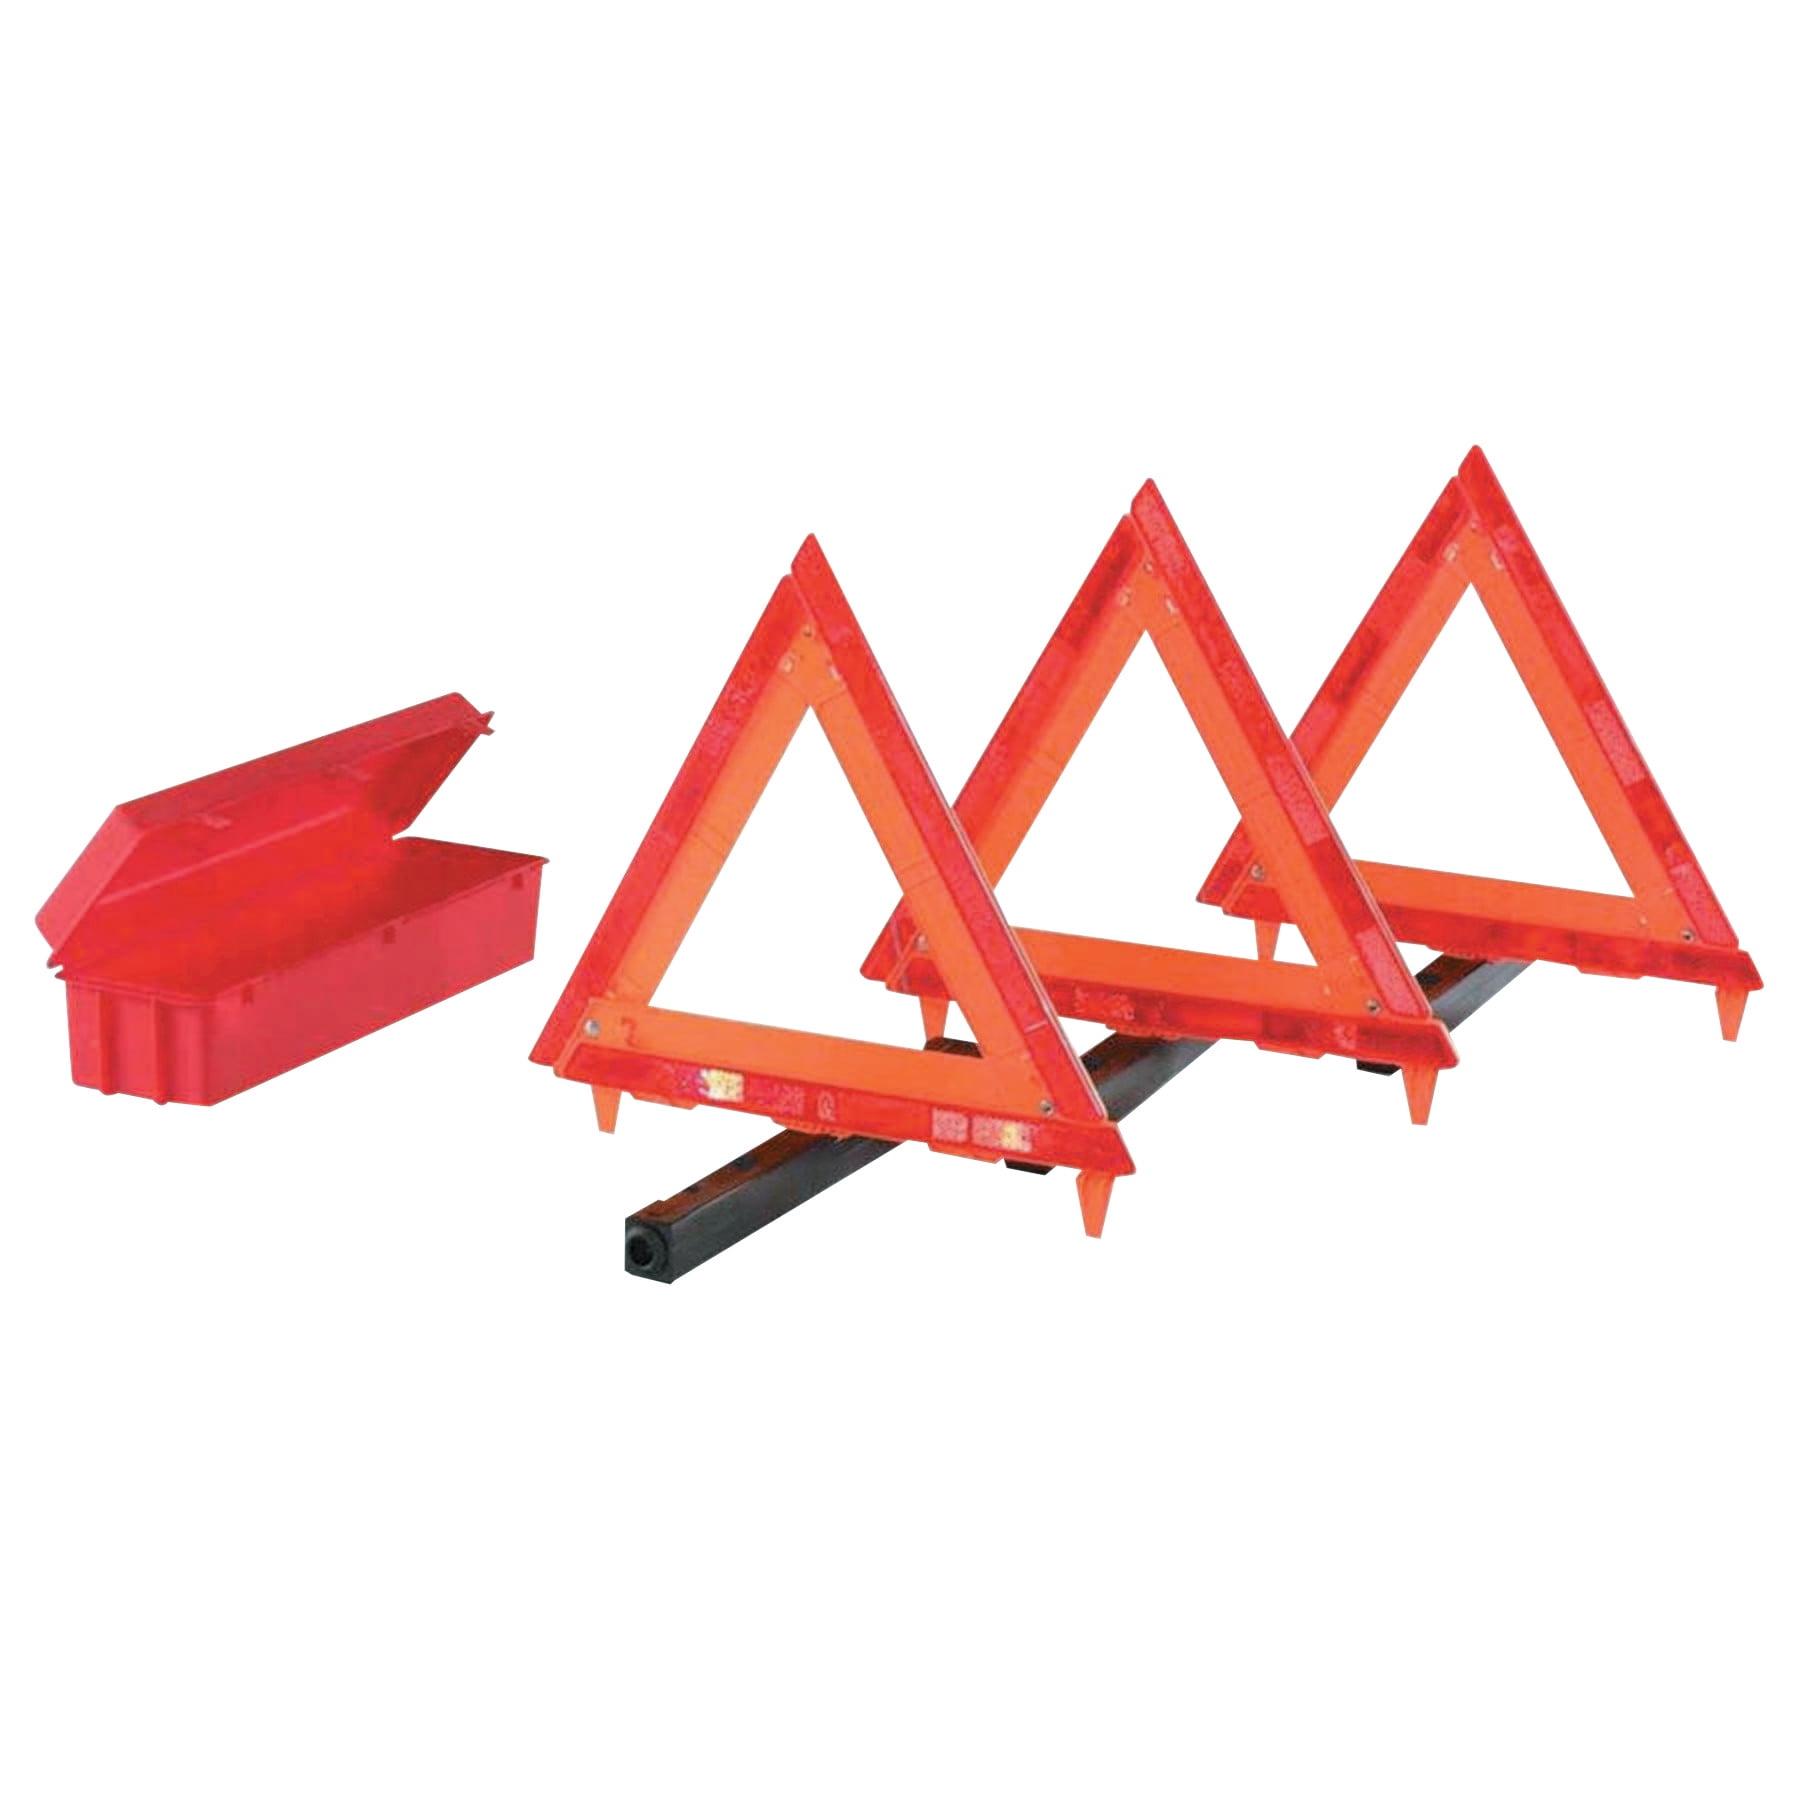 ea Bell 3 Packs Road Warning Triangles w Self Storing Container 22-5-00231-8 3 